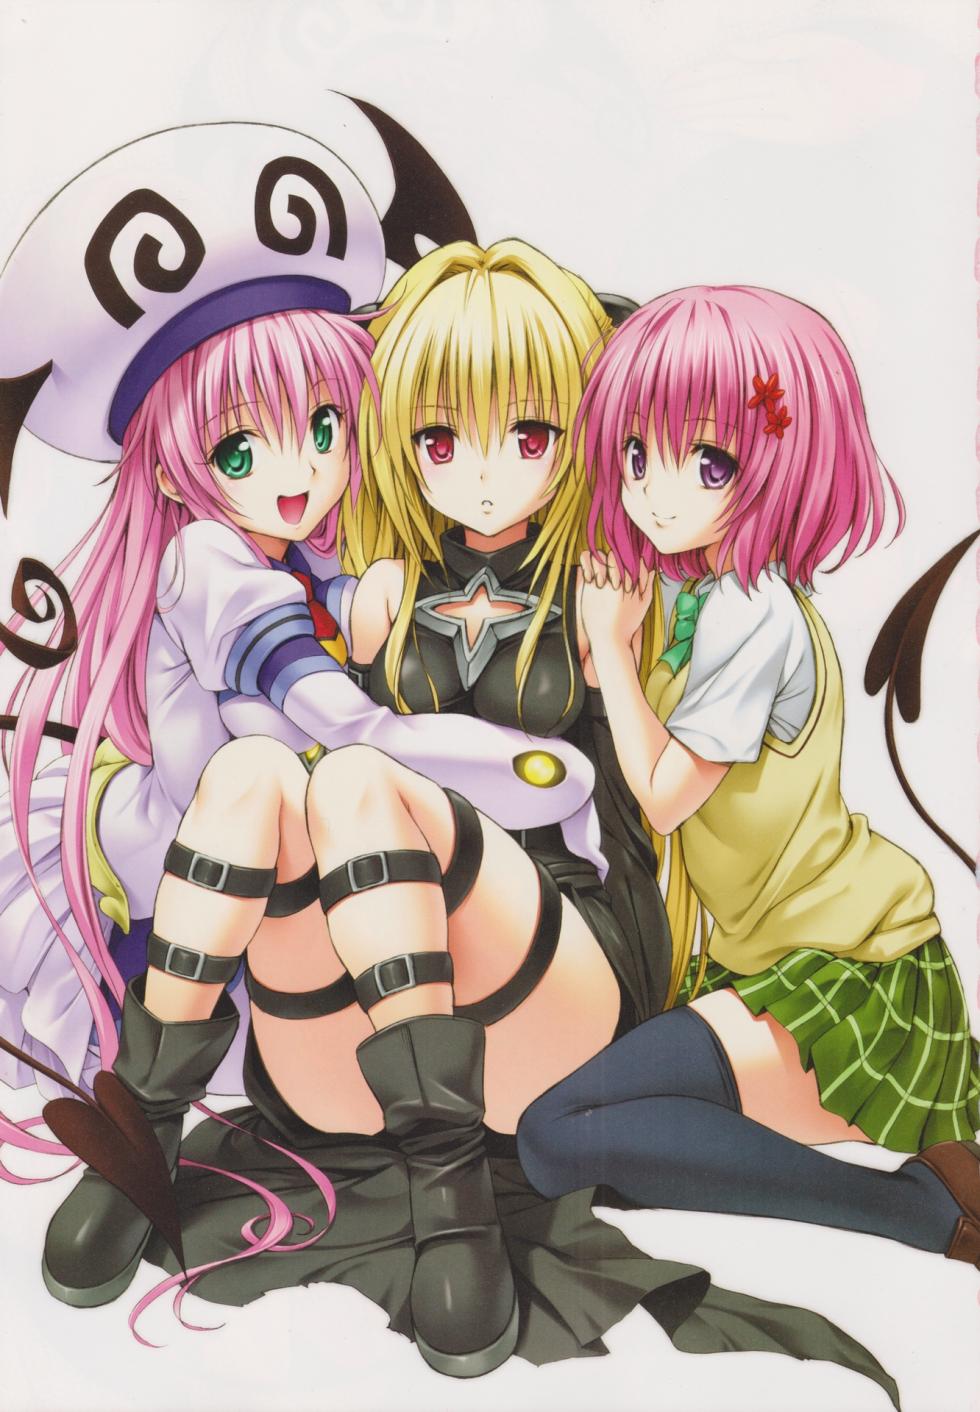 To Love-Ru Trouble manga fanservice compilation FULL COLOR (vol. 1-18) - Page 5